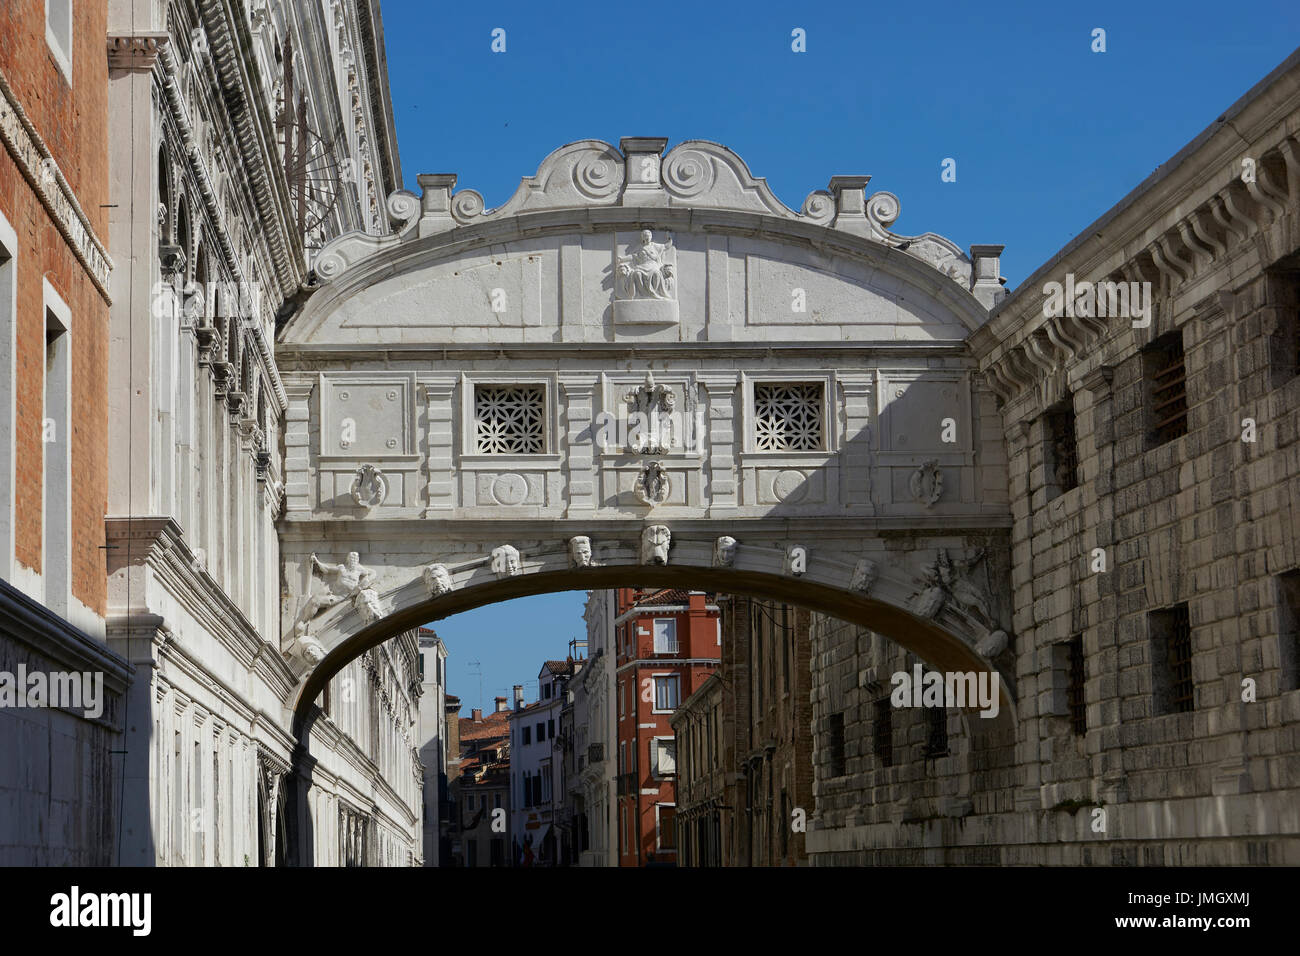 A view of the Bridge of Sighs. Stock Photo